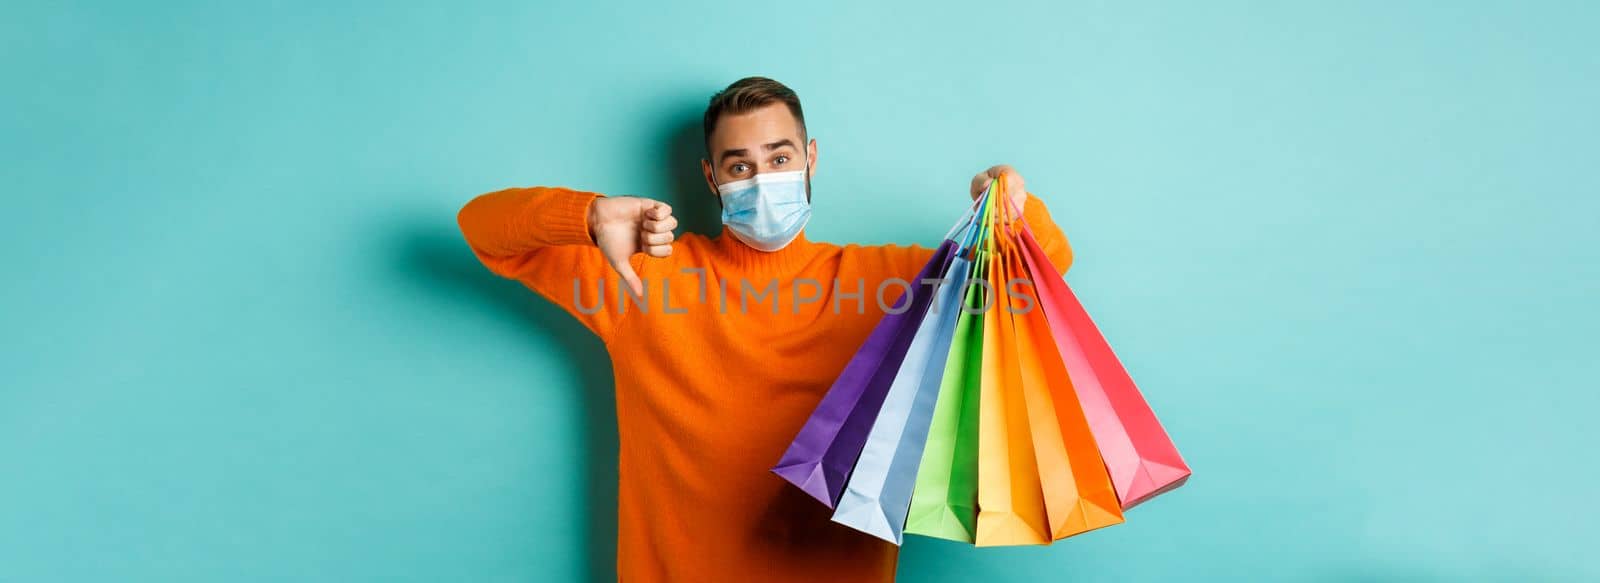 Covid-19, social distancing and lifestyle concept. Disappointed young man in medical mask from coronavirus, showing thumb down and shopping bags.